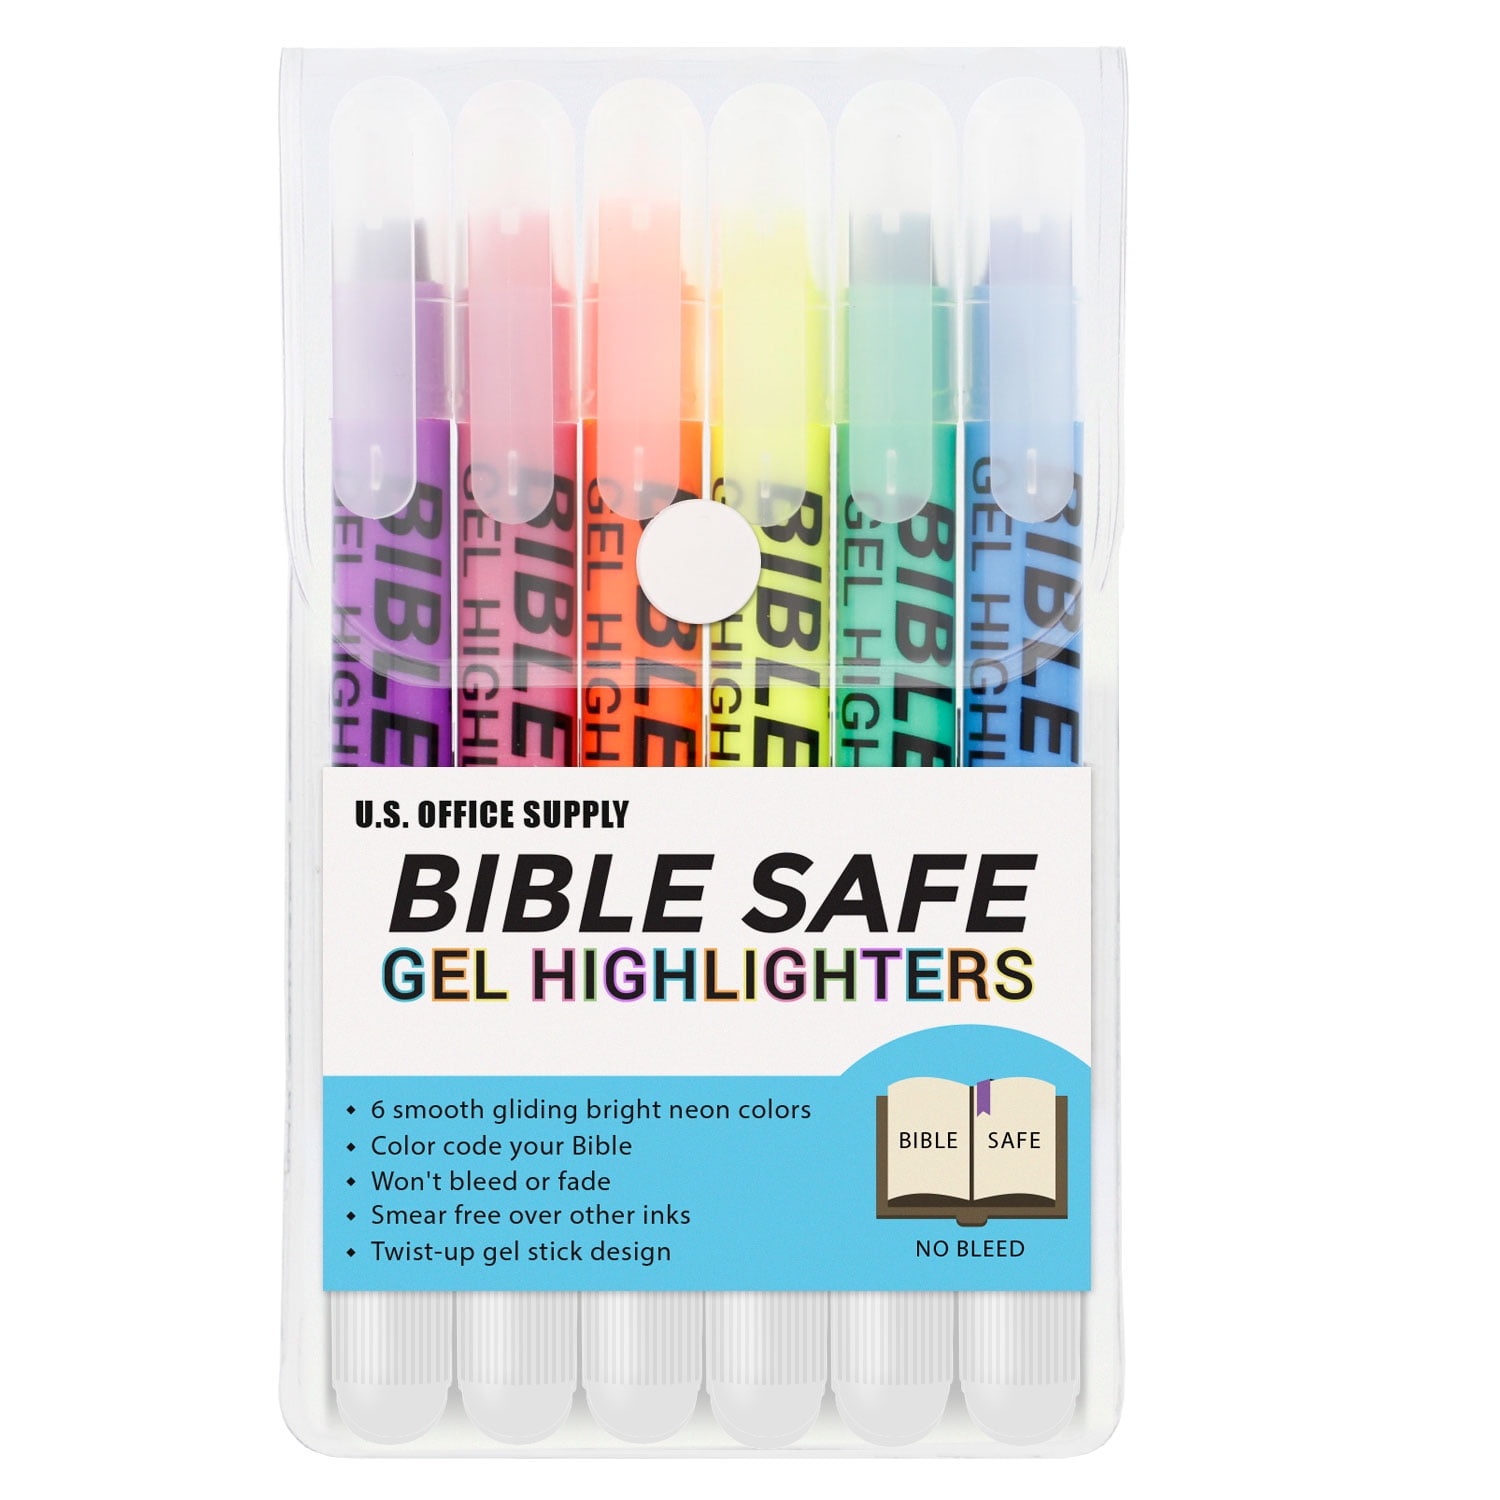 Leven 6 Pack Dual Tips Highlighters, 6 Assorted Colors, Needle and Chisel  Tip, Bible Pens No Bleed Through, No Smear Fast Dry Highlighter for Bible  Journaling, Bible Stud Importado em Promoção na Americanas